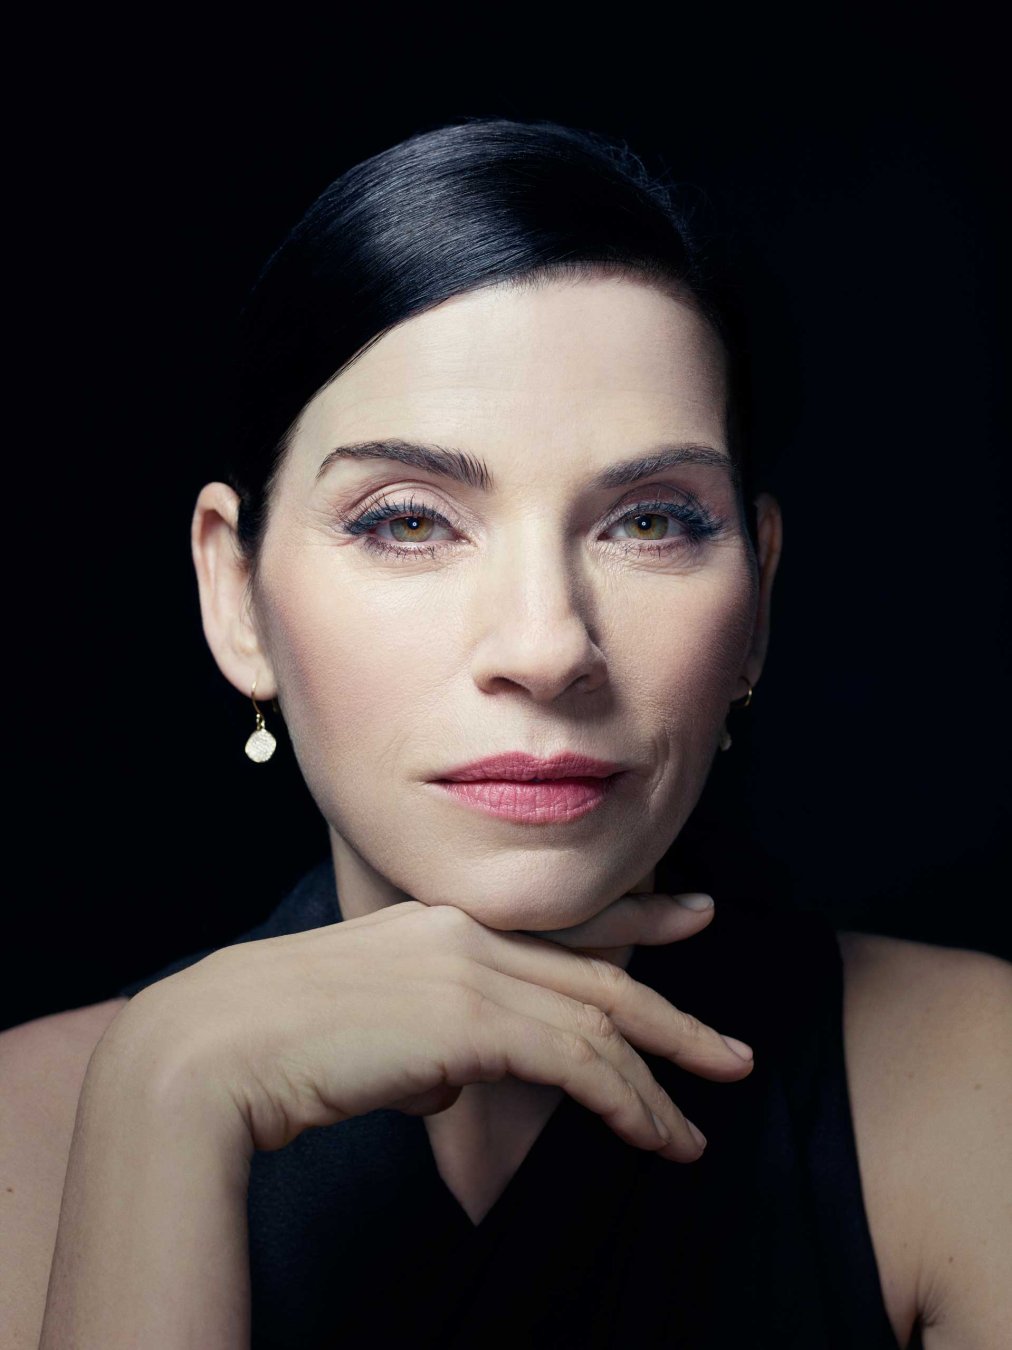 Of julianna margulies pictures Julianna Margulies